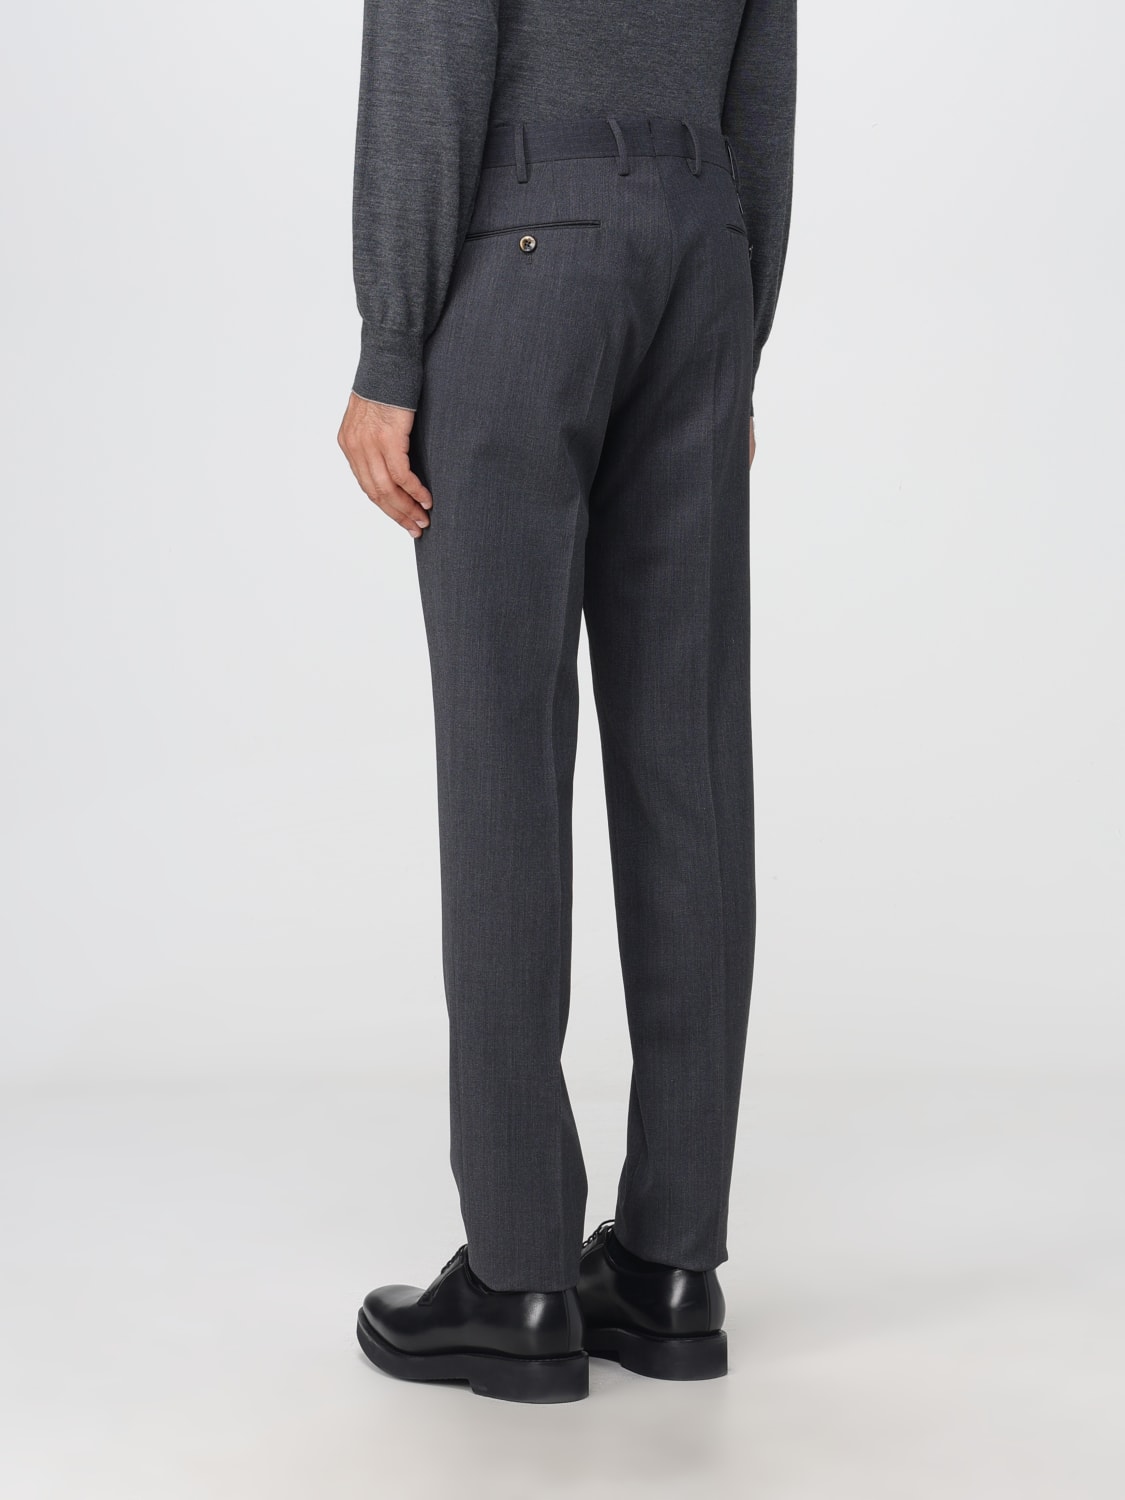 PT Torino Men's Trousers - New Collection